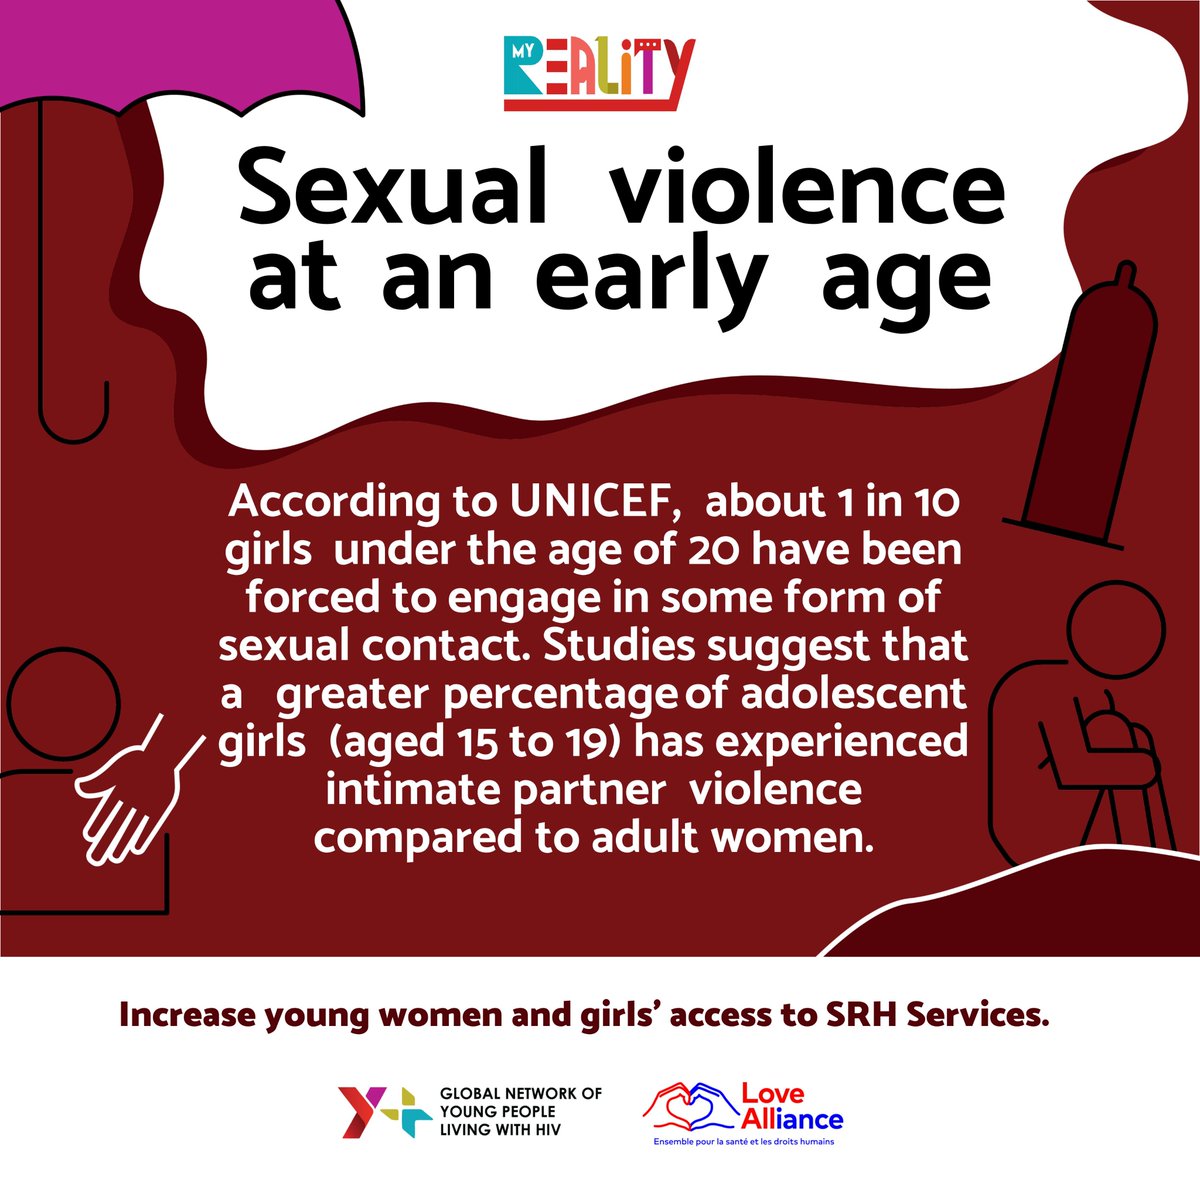 Shockingly, according to UNICEF, 120 million girls worldwide have endured forced sexual contact before turning 20. Studies have shown higher rates of intimate partner violence among adolescent girls aged 15 to 19 than adult women. These stats demand action. That’s why the My…